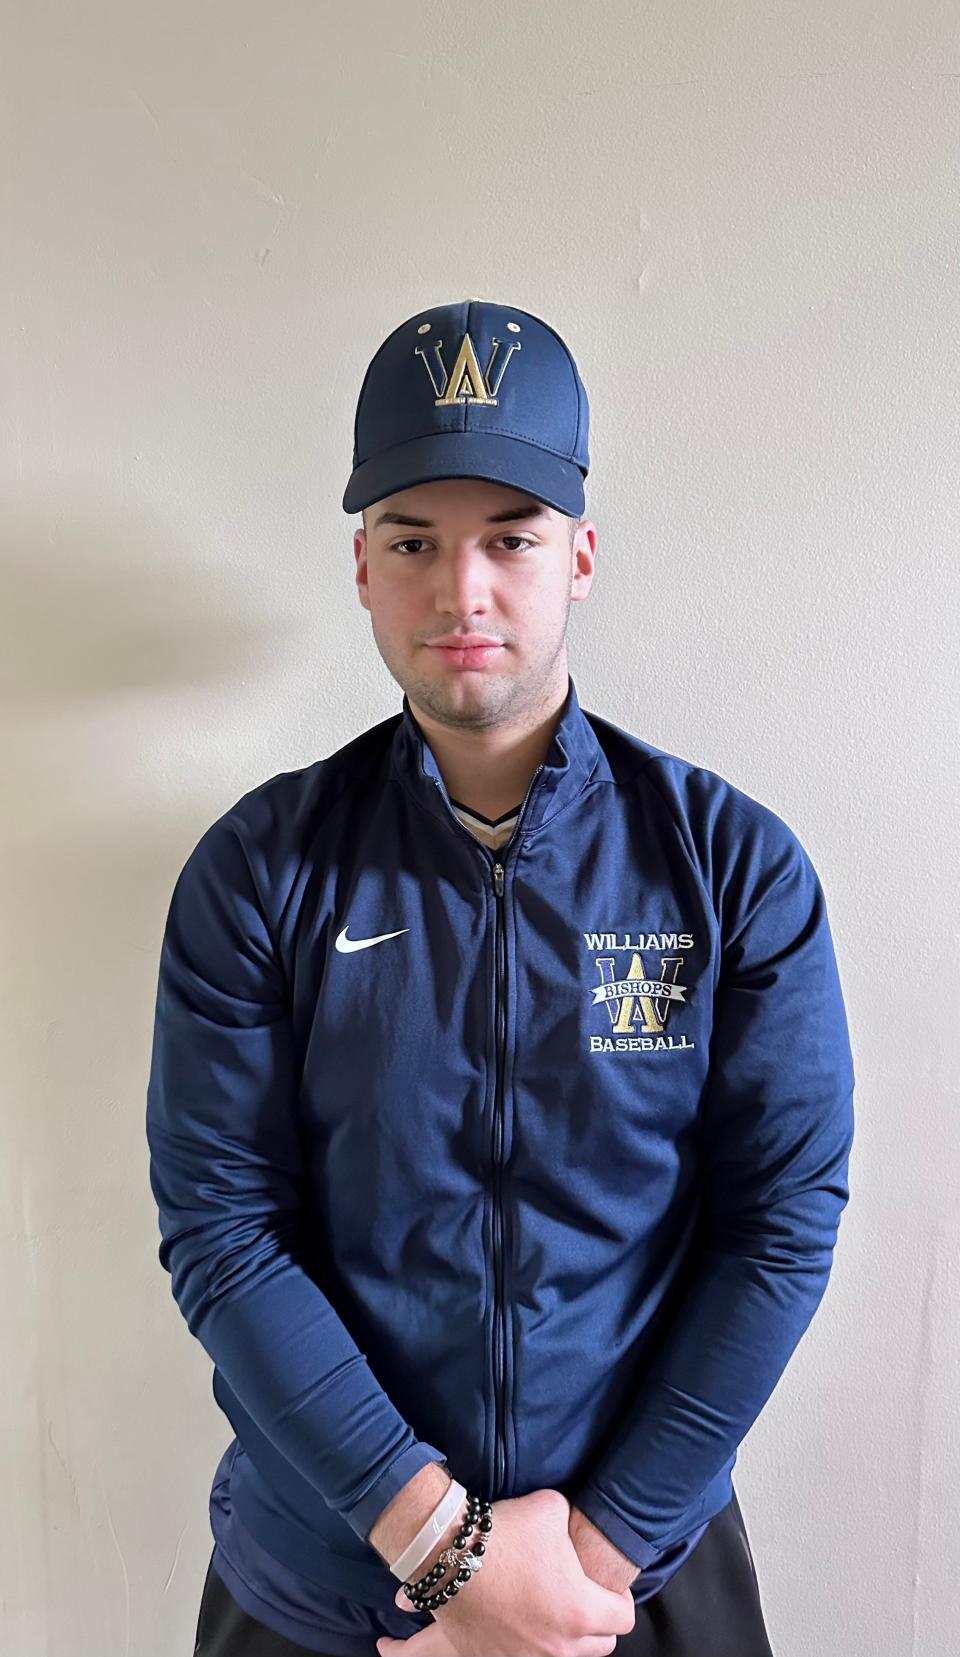 Wilfred Santiago of Archbishop Williams High has been named to The Patriot Ledger/Enterprise All-Scholastic Baseball Team.